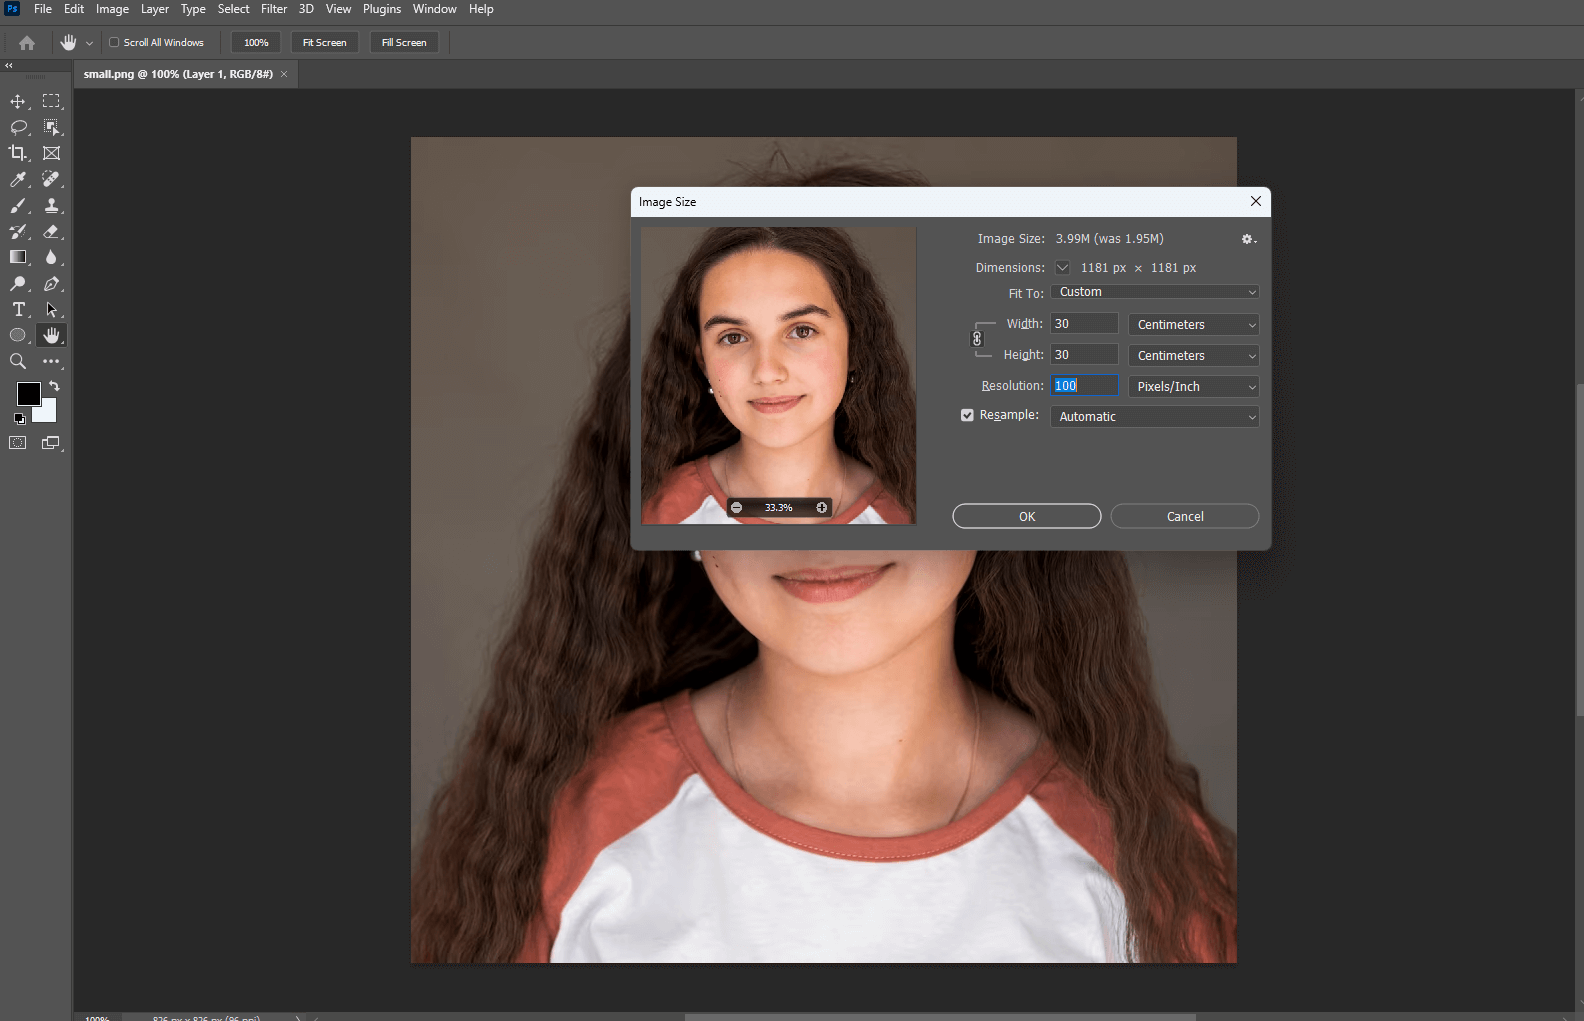 make a girl image bigger and clear in photoshop